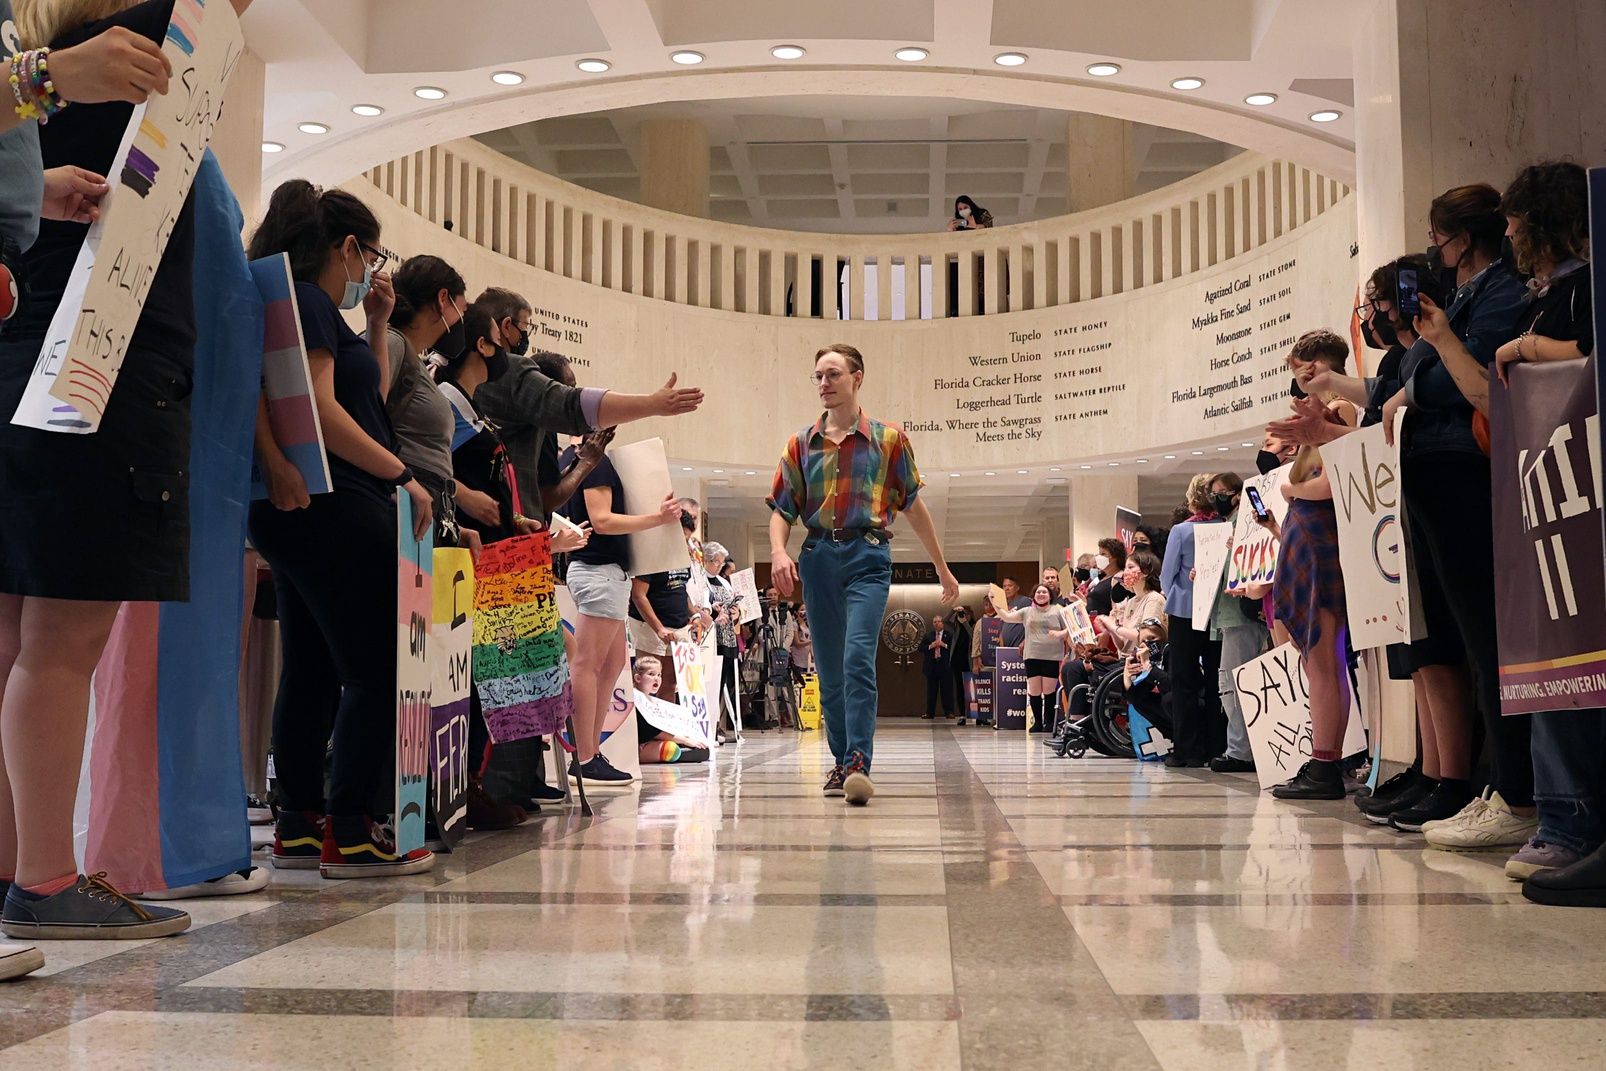 a person walks down the center of a group of LGBTQ protesters in the senate